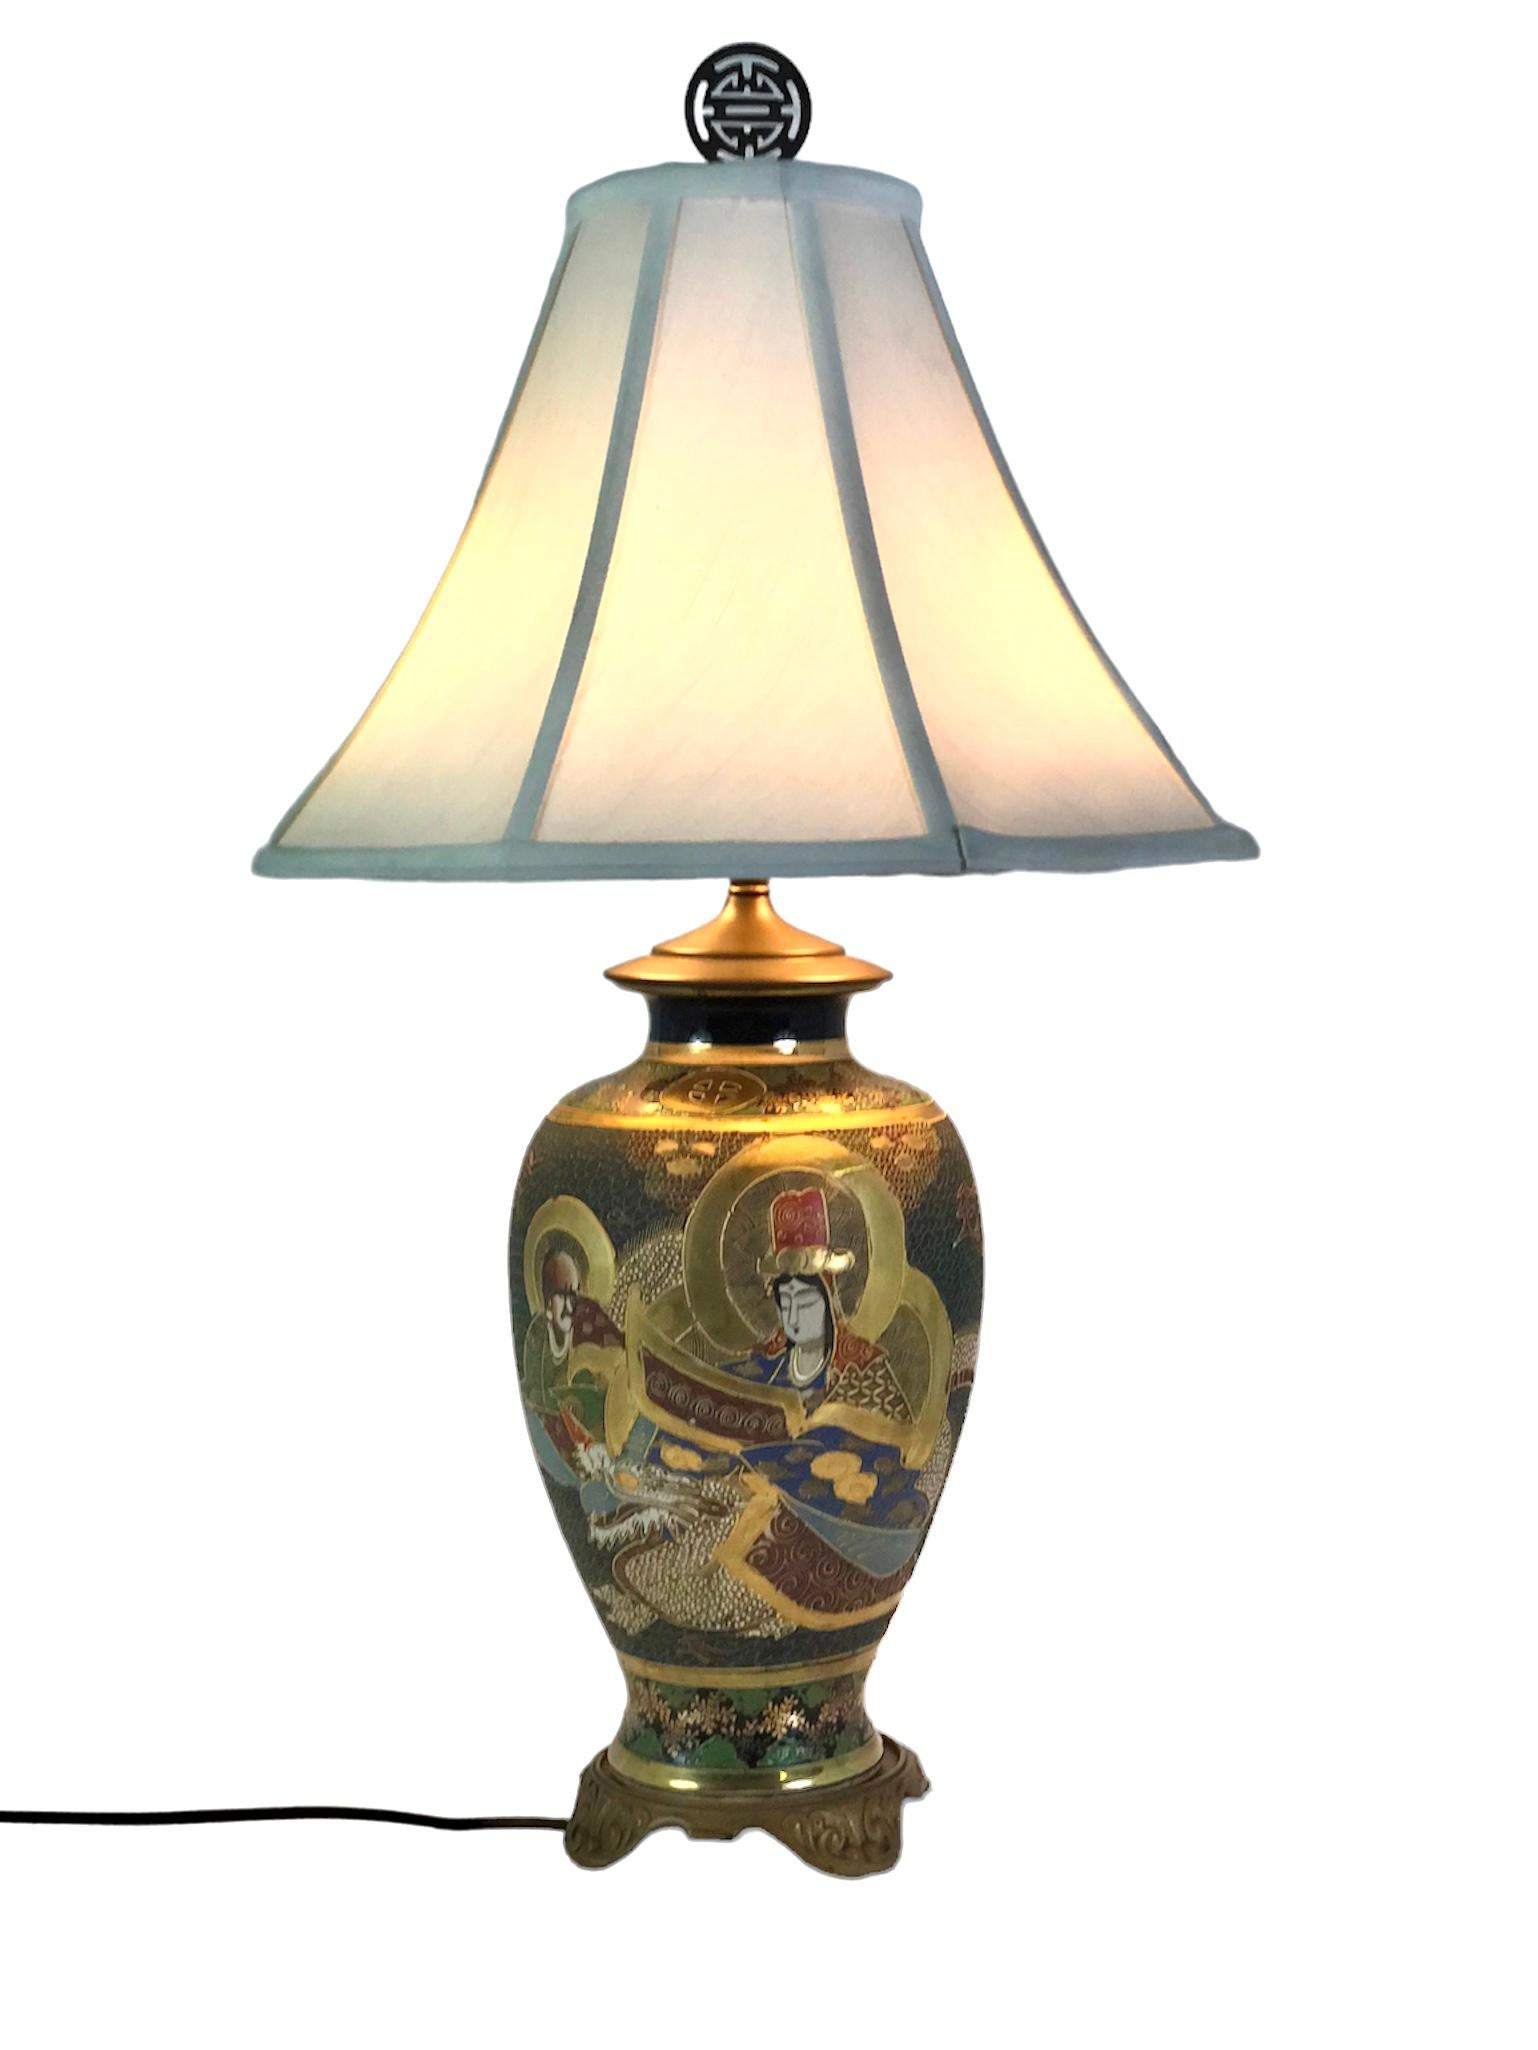 Antique Japanese Satsuma pottery table lamp decorated with hand-painted figures of a group of Immortals with He Xiangu holding scroll. This type of decoration of the Immortals conveys good luck, peace, fortune and happiness. Done in gilt and